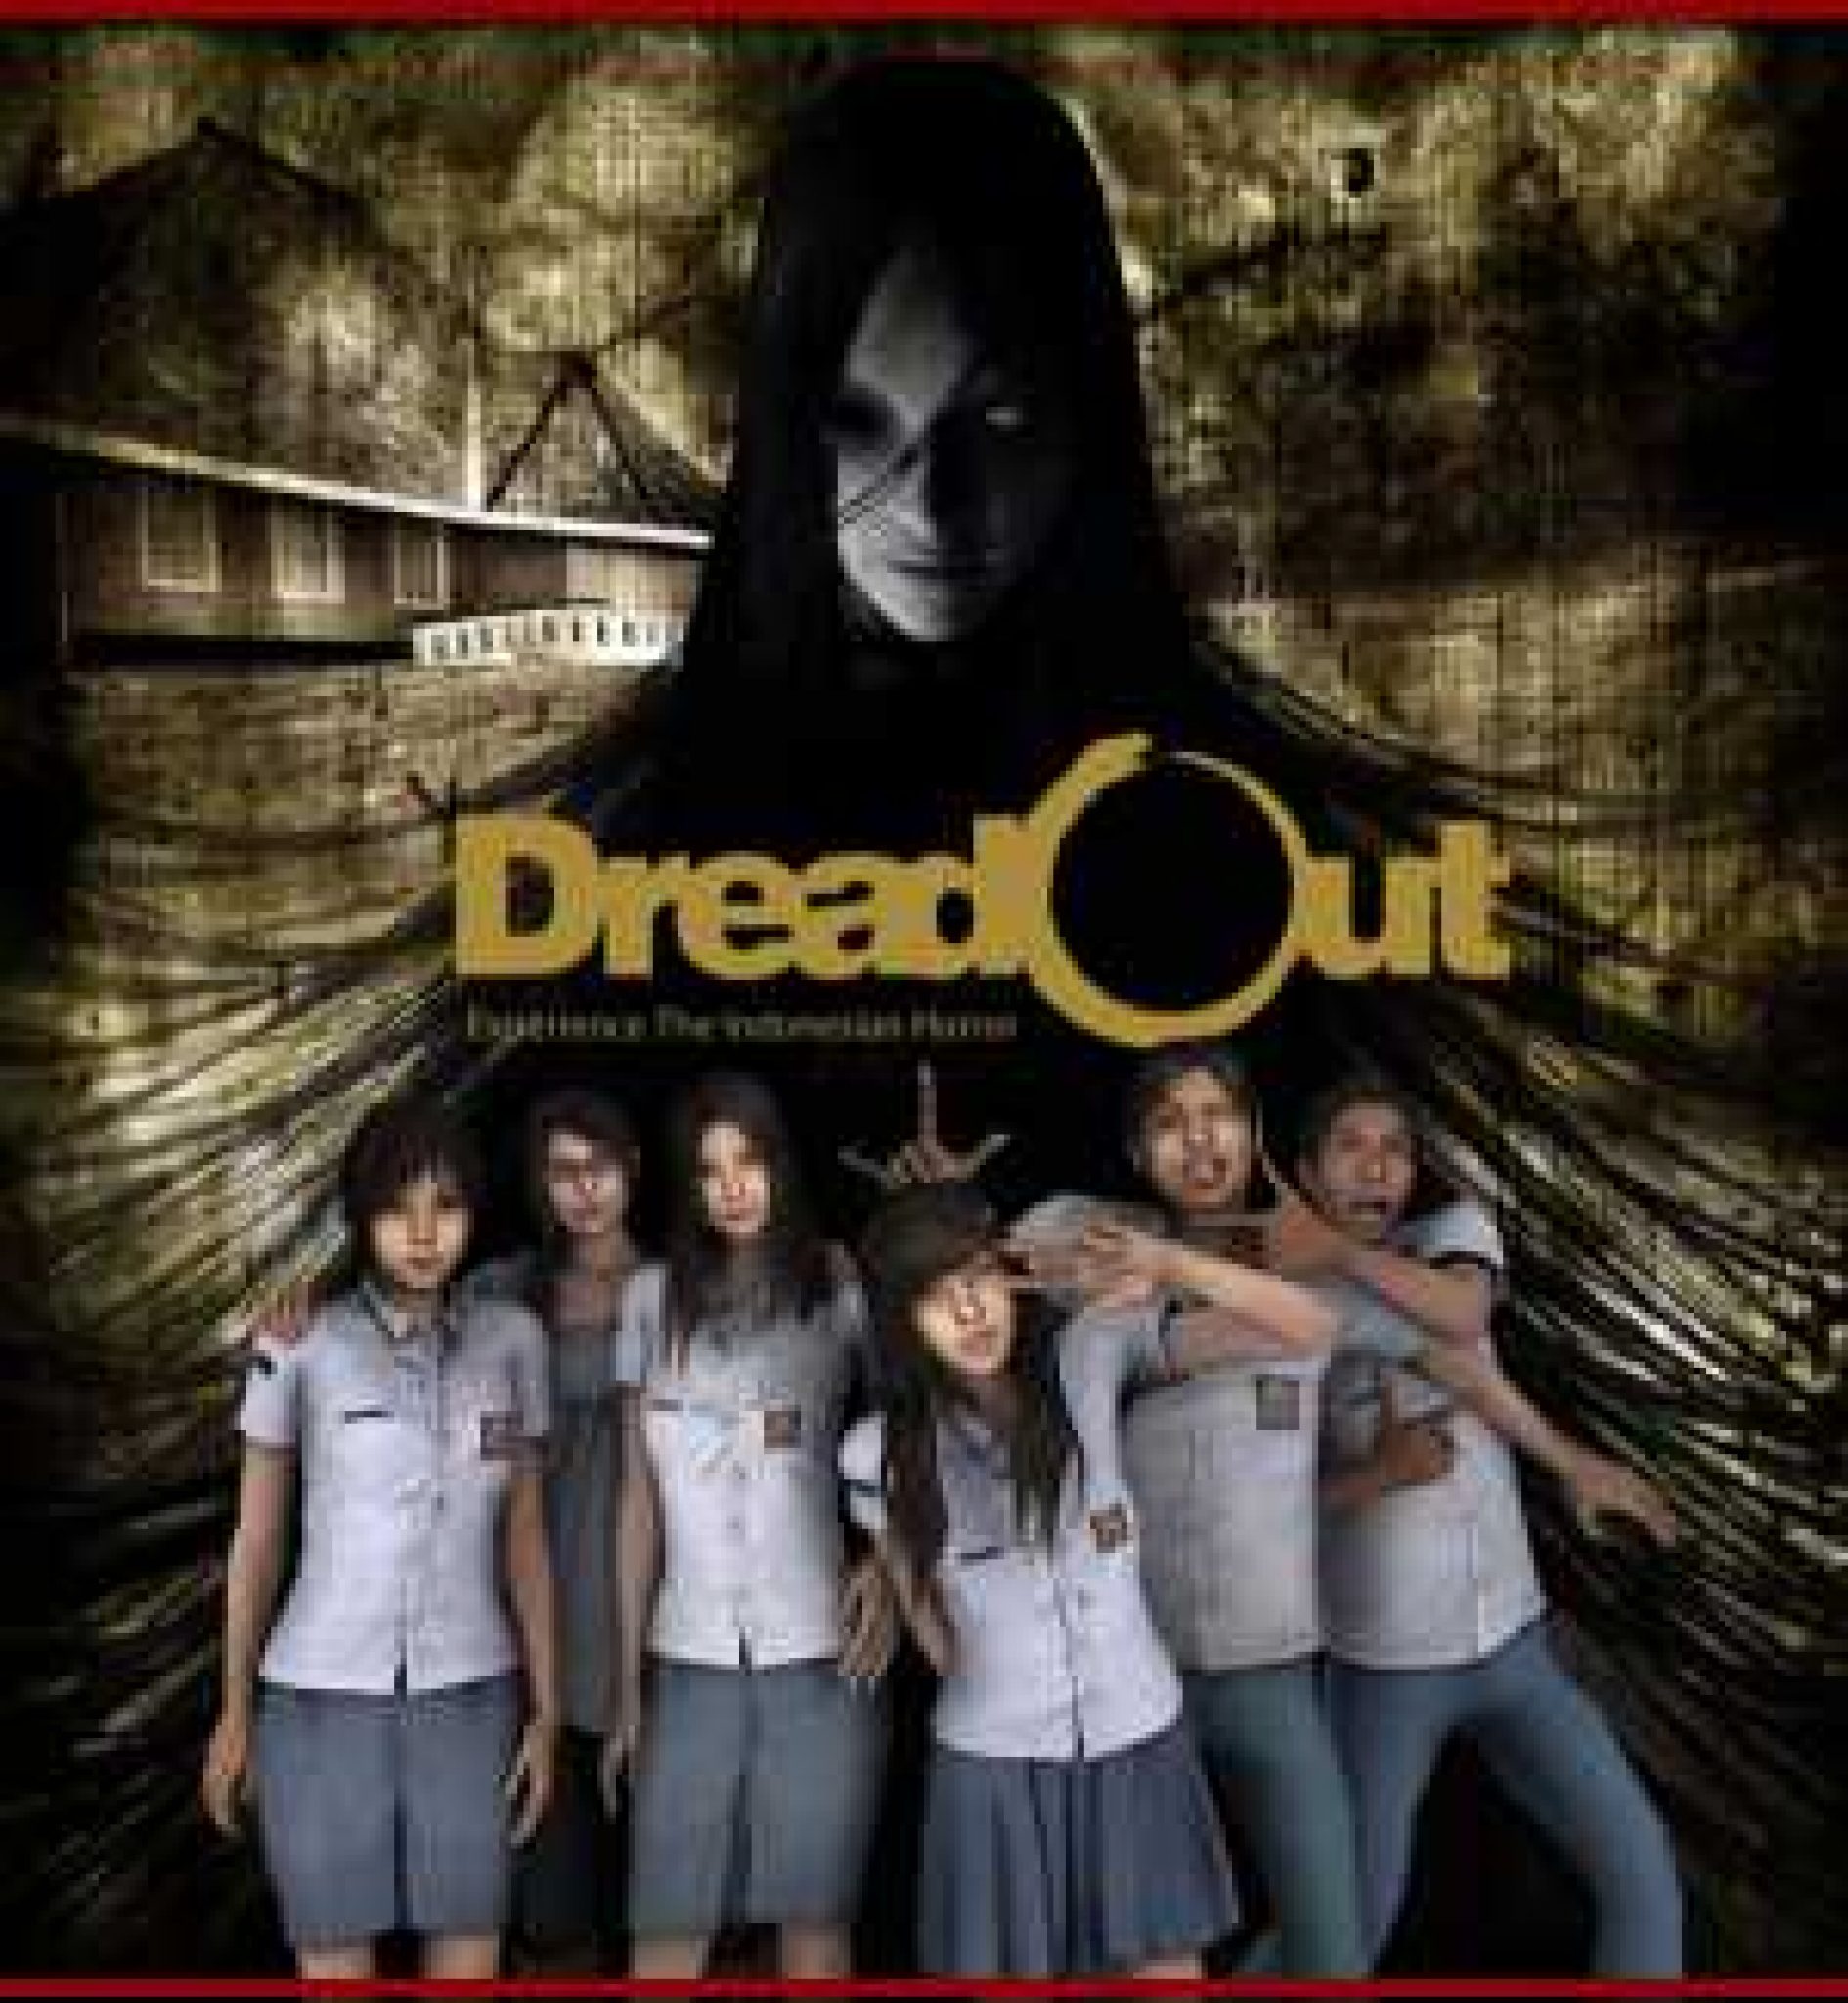 download dreadout 2 xbox for free